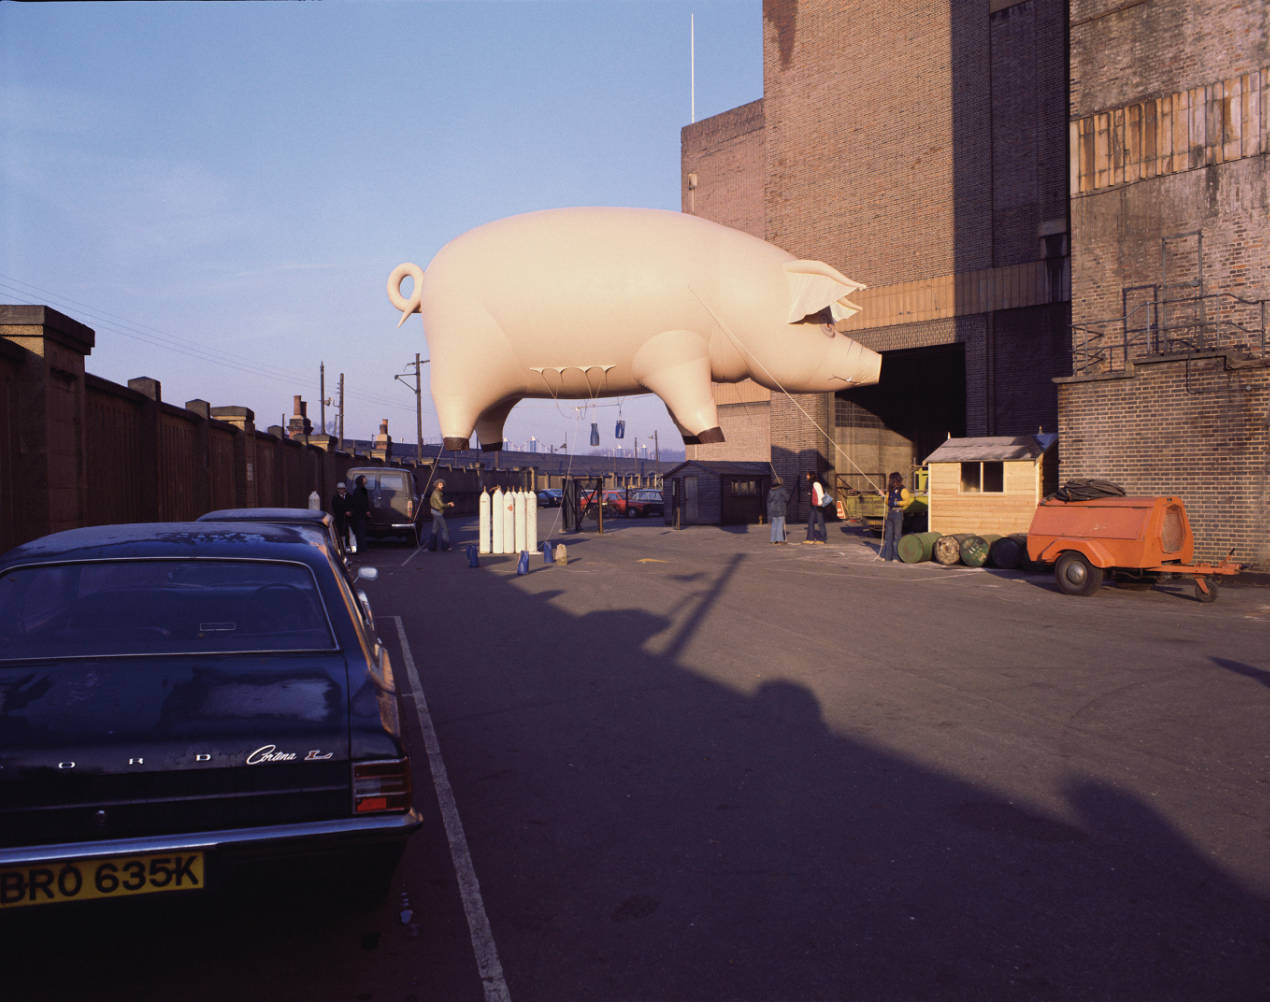 Inflatable pig Algie backstage during the original 1977 Animals cover shoot